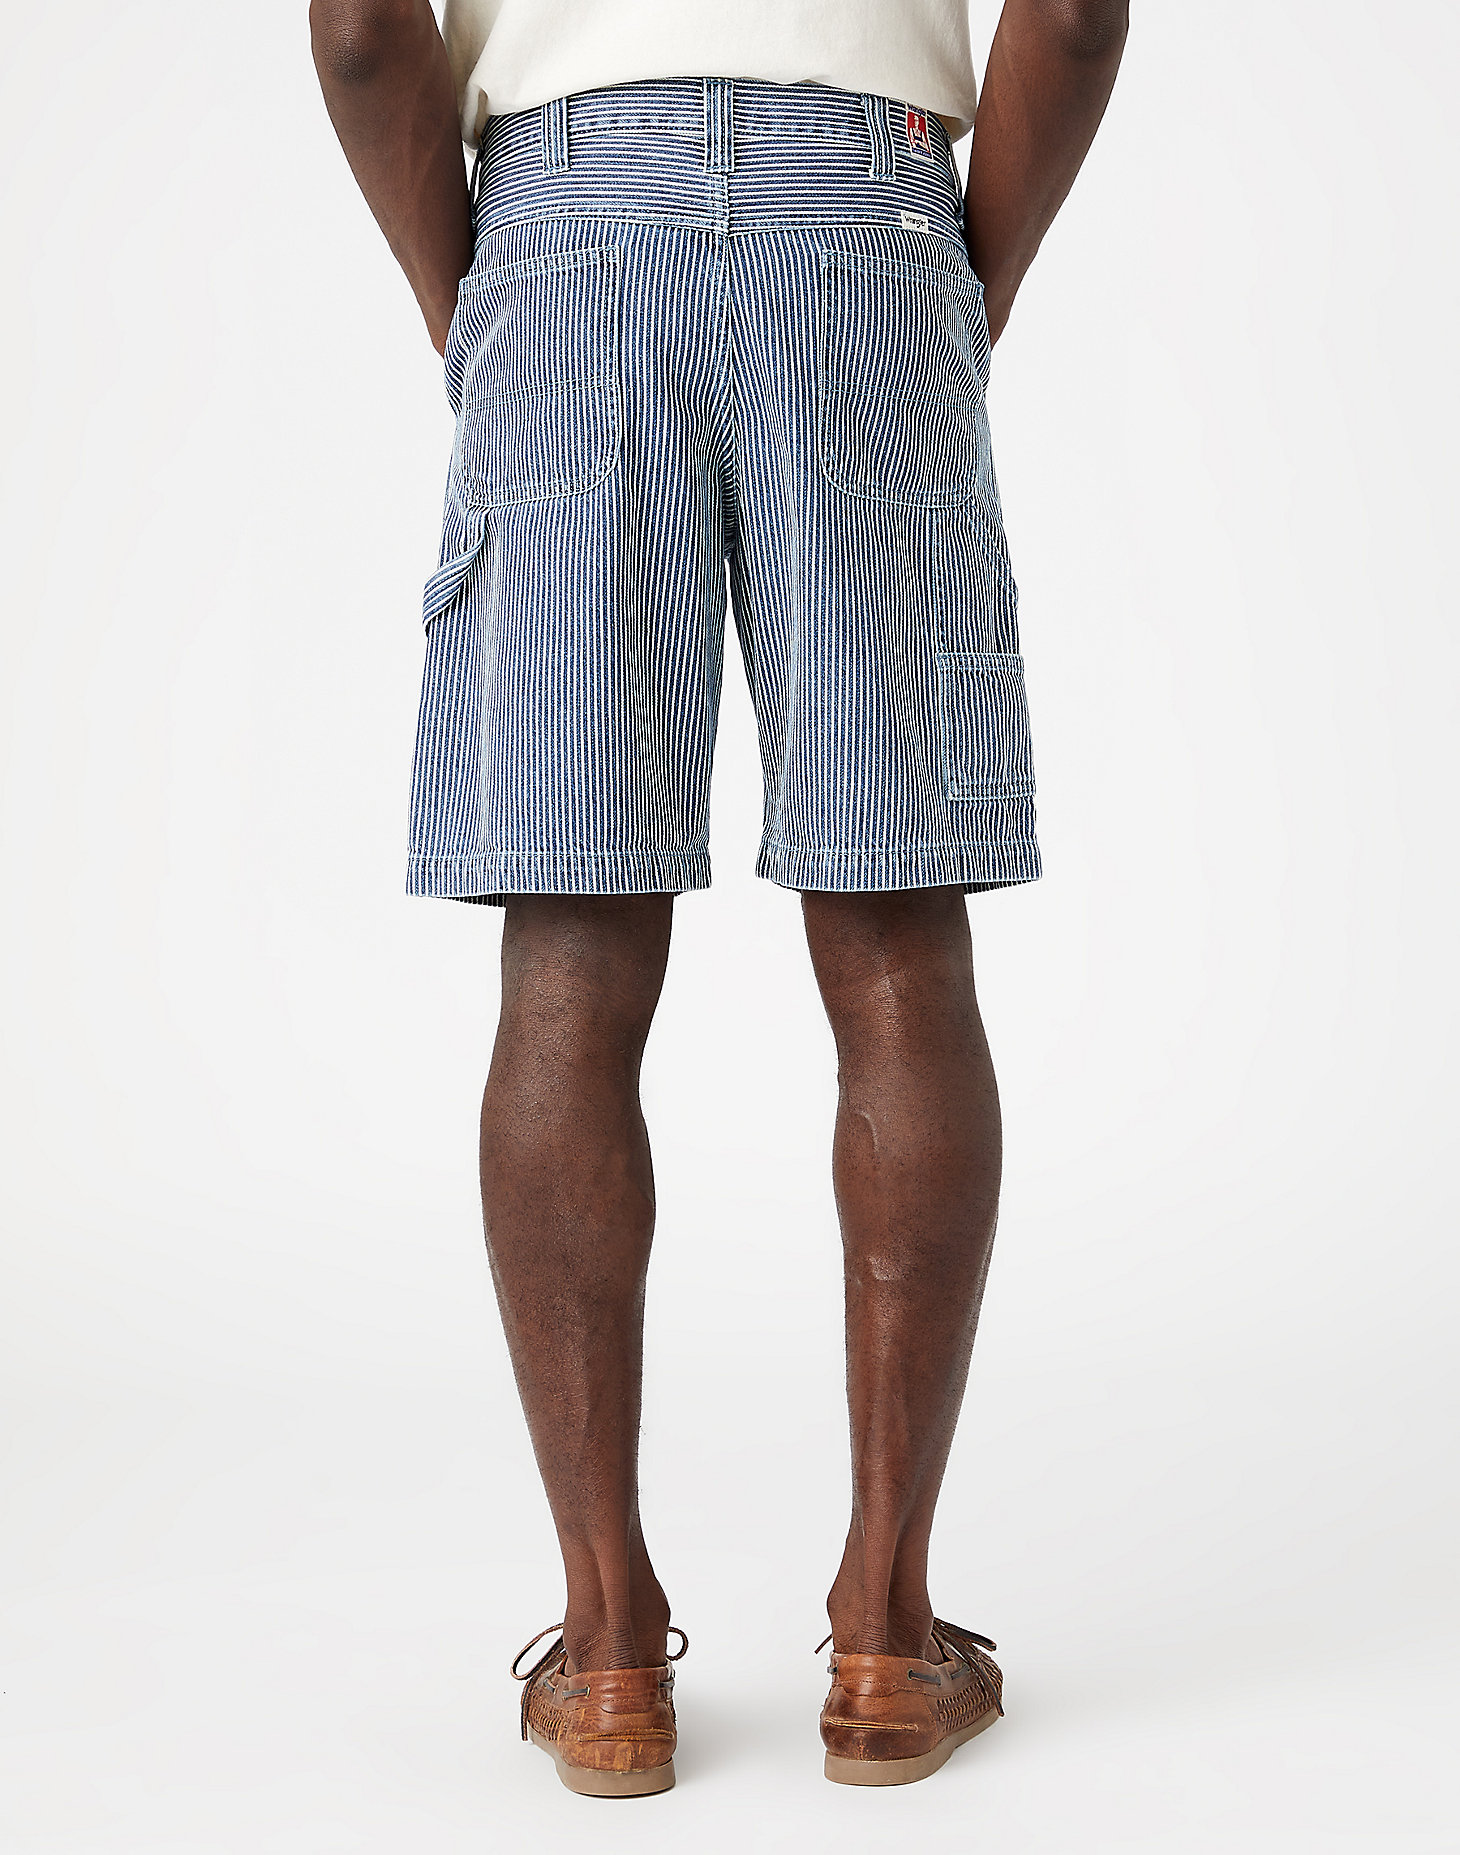 Casey Relaxed Carpenter Shorts in Hickory Stripe alternative view 2